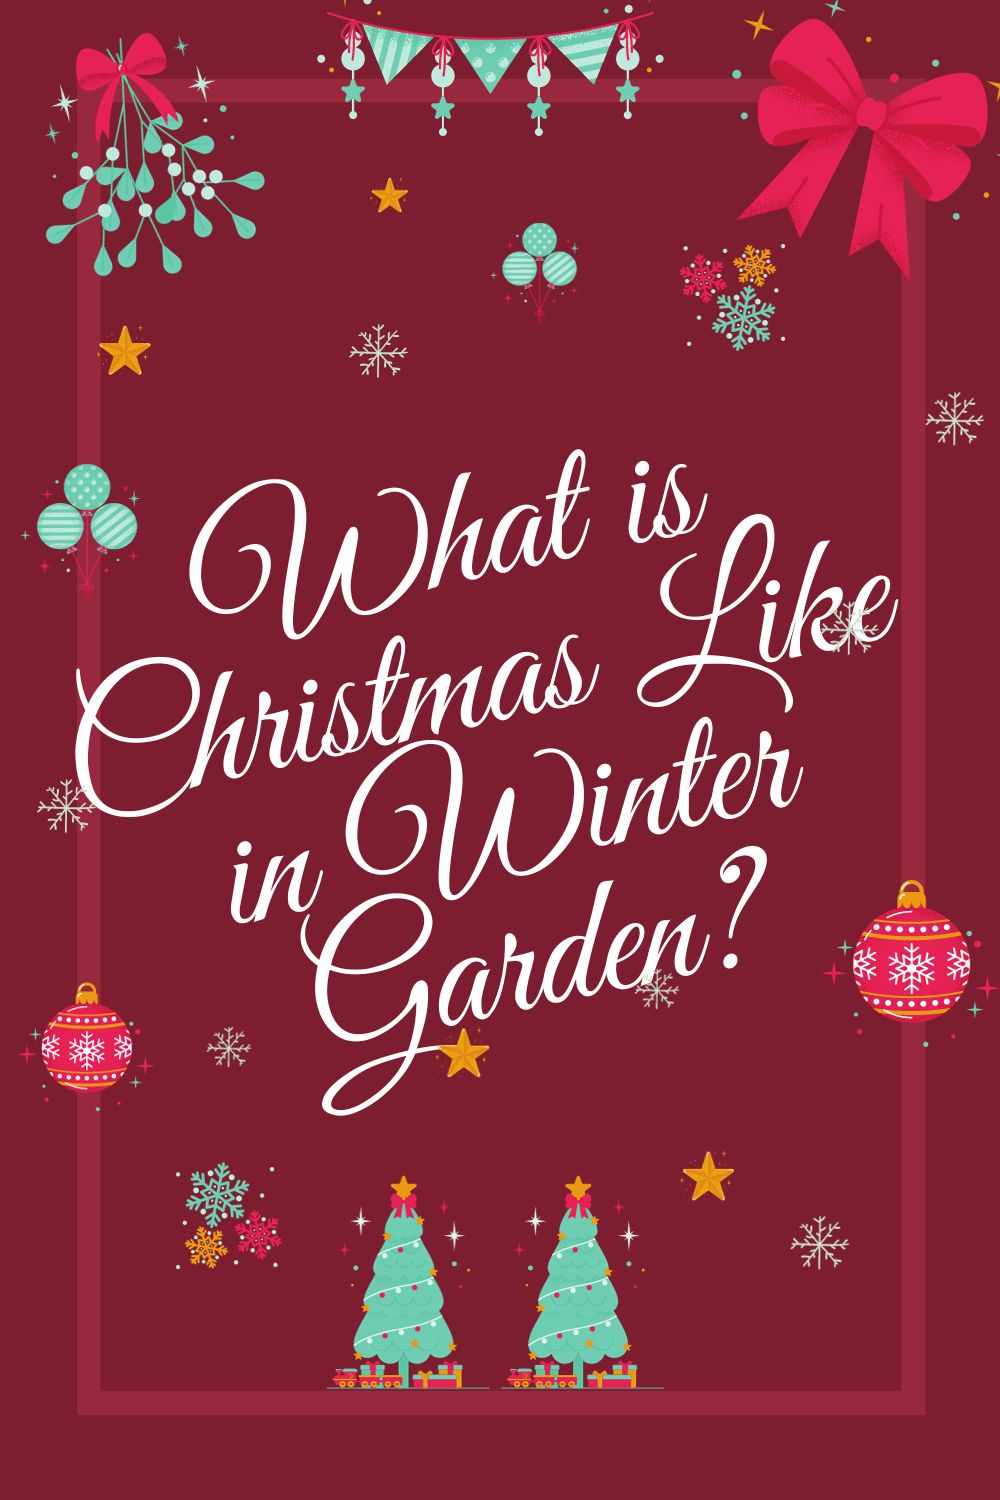 What is Christmas Like in Winter Garden?